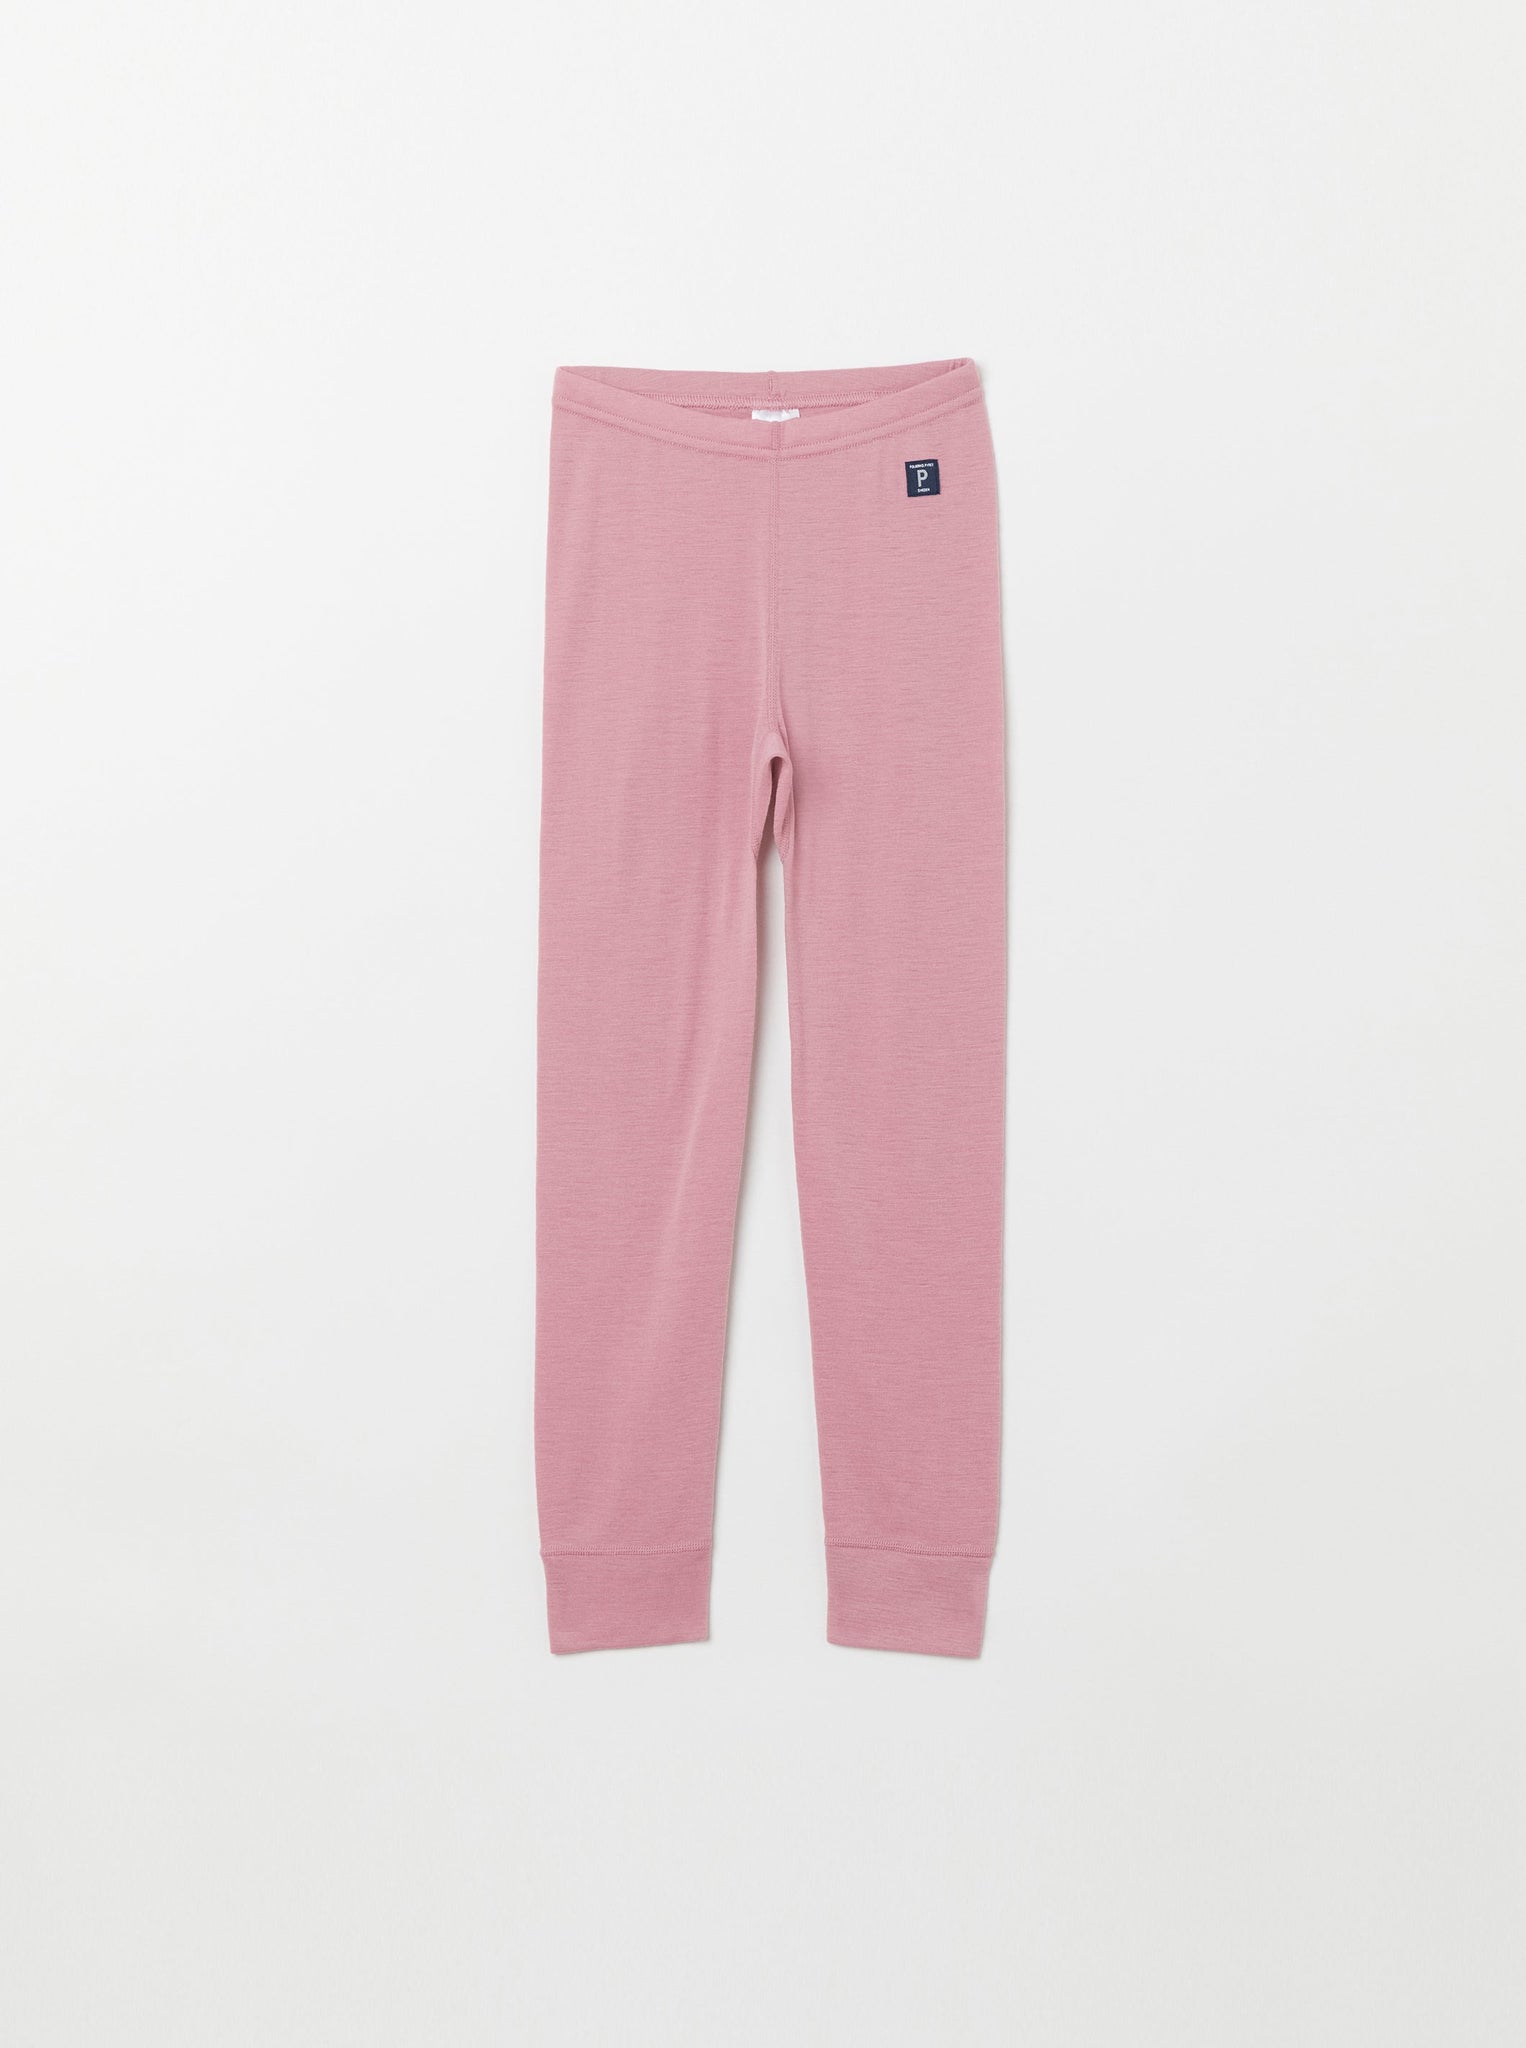 Merino Pink Thermal Kids Long Johns from the Polarn O. Pyret kidswear collection. Made from sustainable sources.